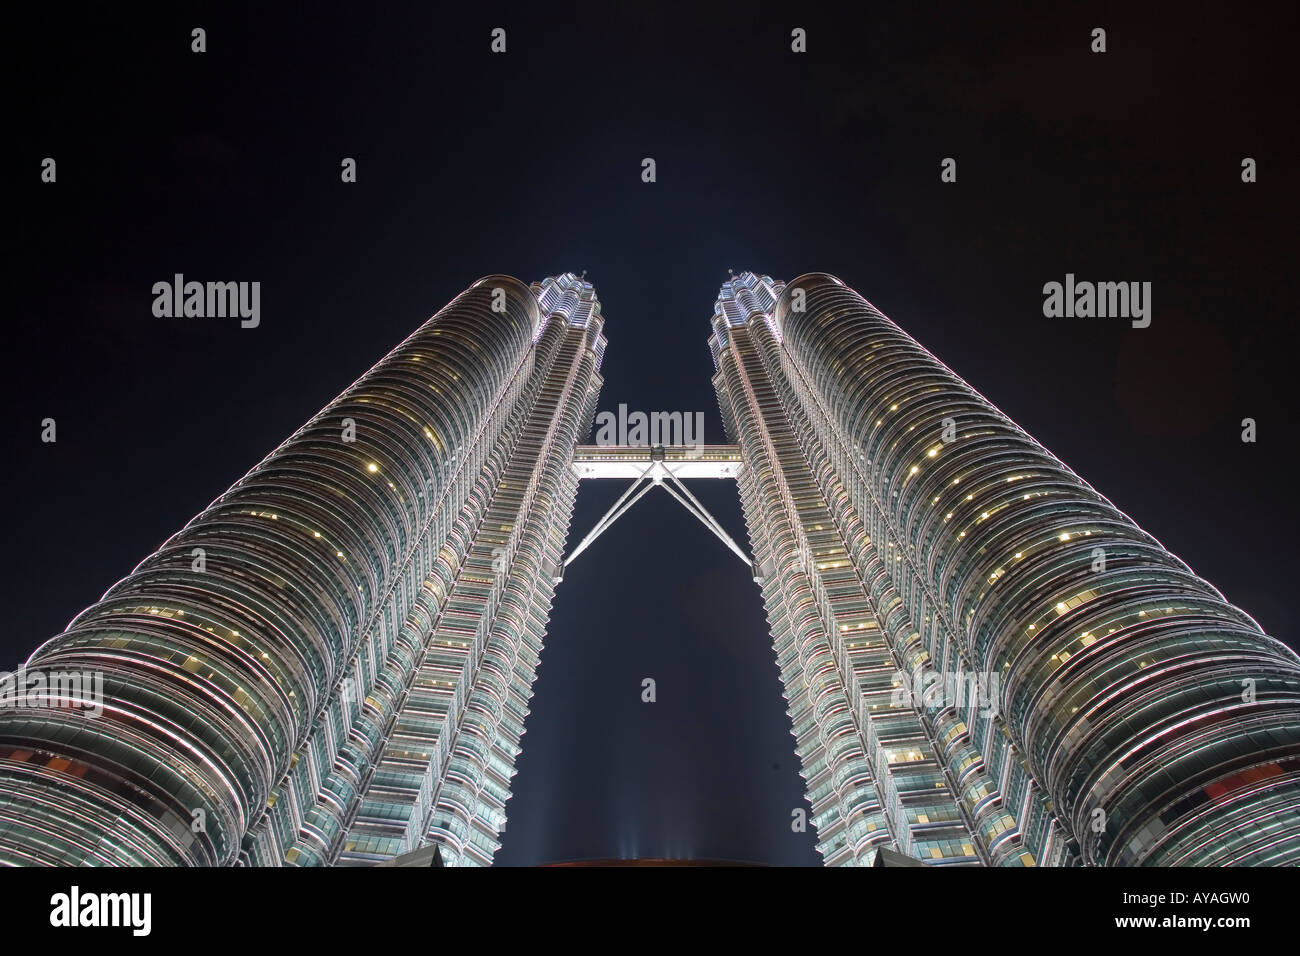 Malaysia Kuala Lumpur 88 story tall Petronas Towers at night the world s  tallest building since 1998 at 452 meters or 1483 feet Stock Photo - Alamy